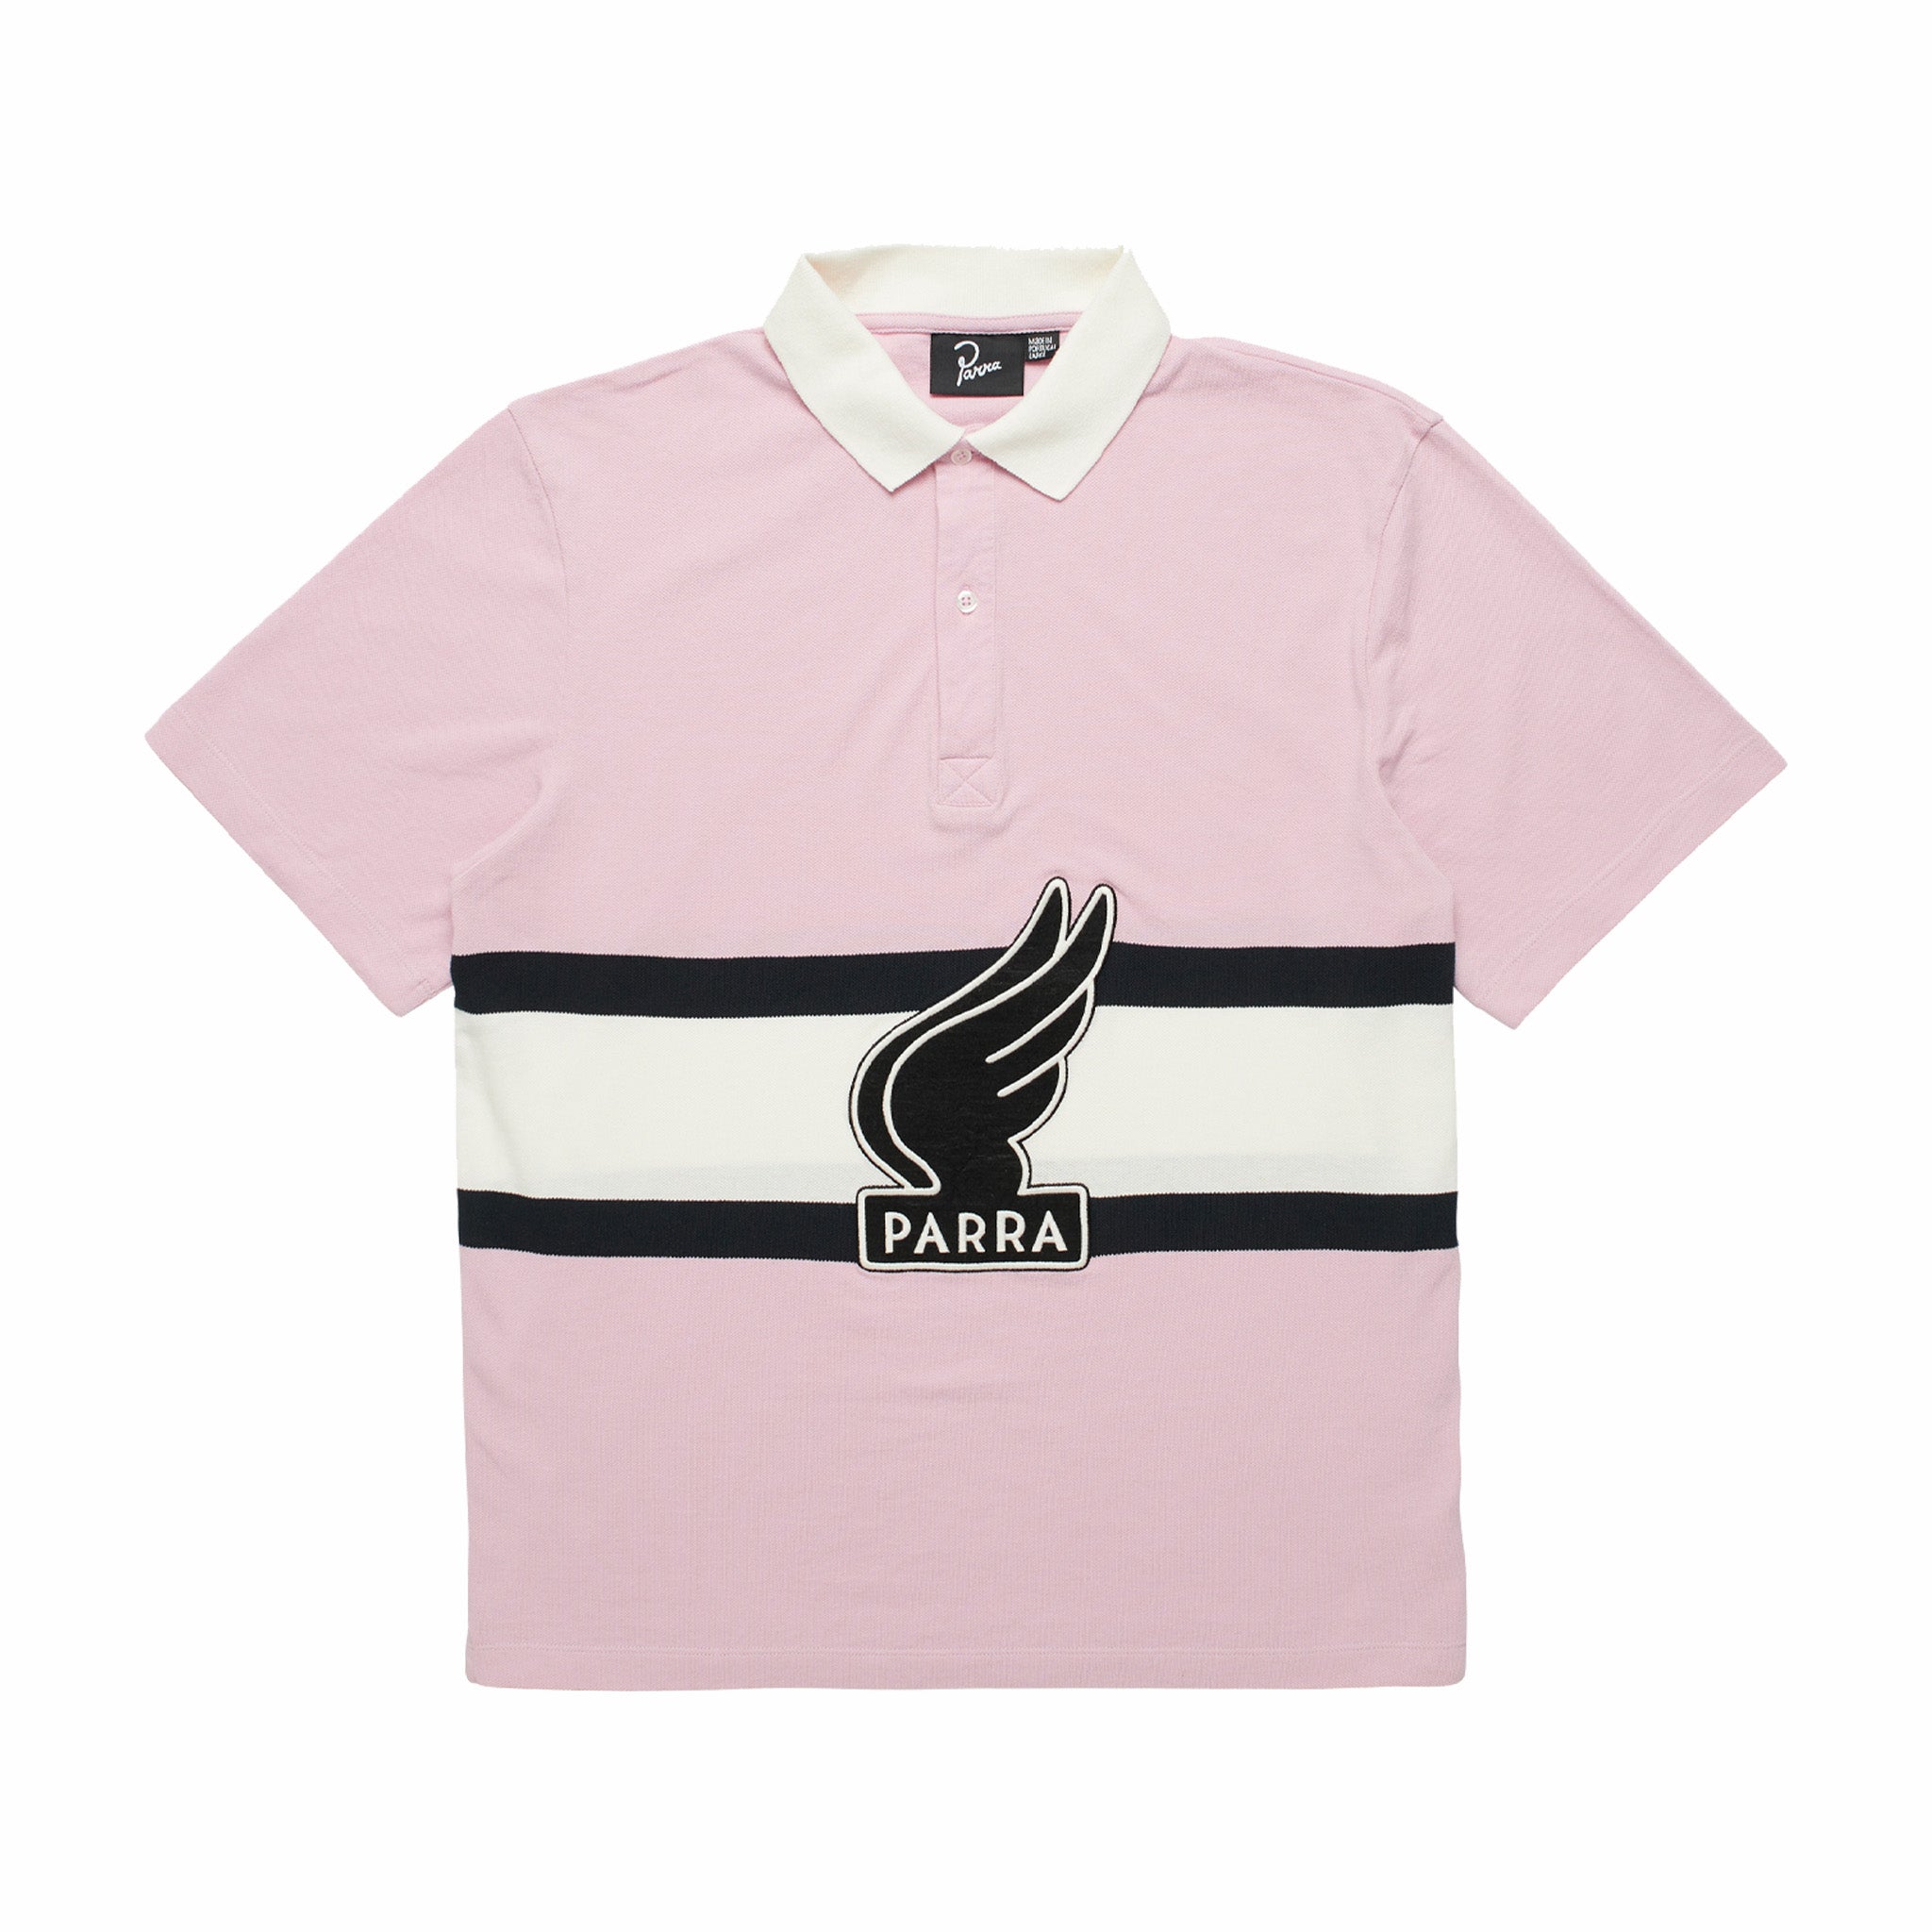 By Parra Winged Logo Polo Shirt (Pink/Off White) - August Shop